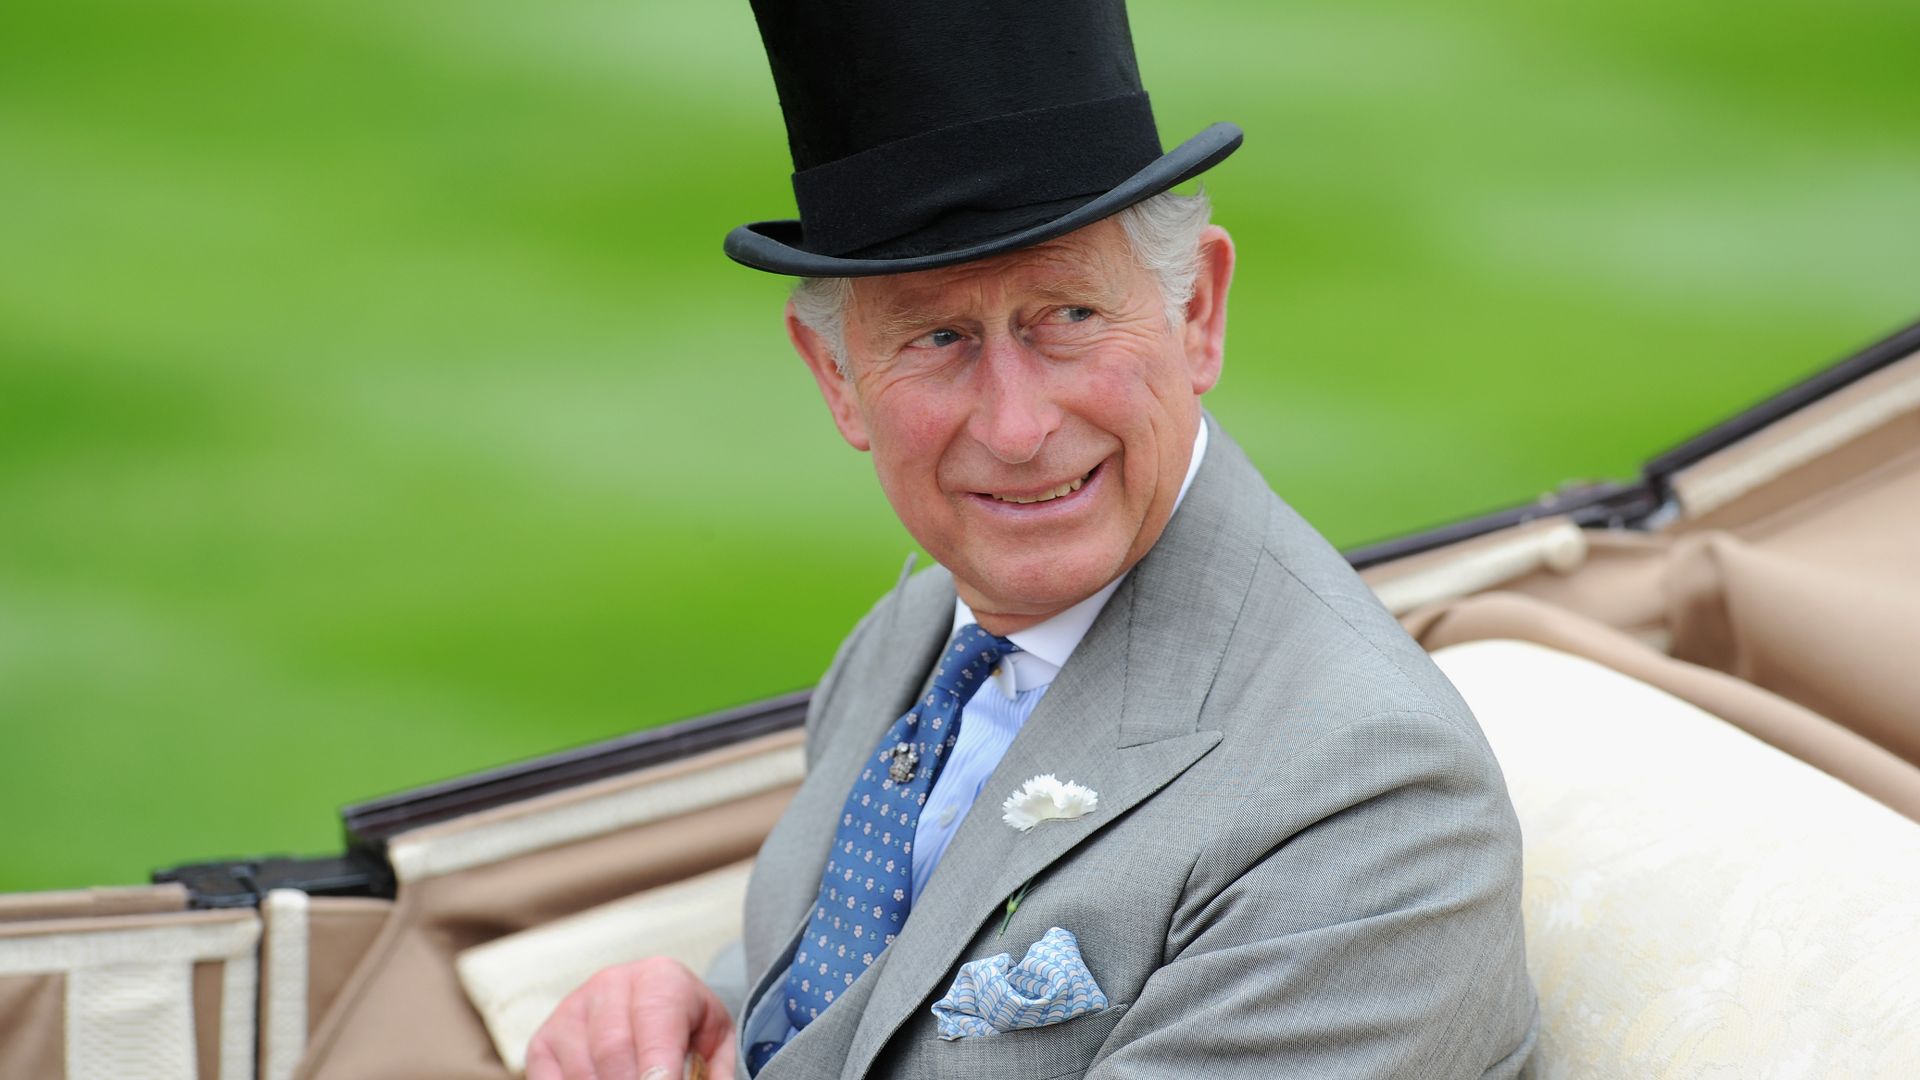 Prince Charles, Prince Of Wales  attends day one of Royal Ascot at Ascot Racecourse on June 18, 2013 in Ascot, England.  